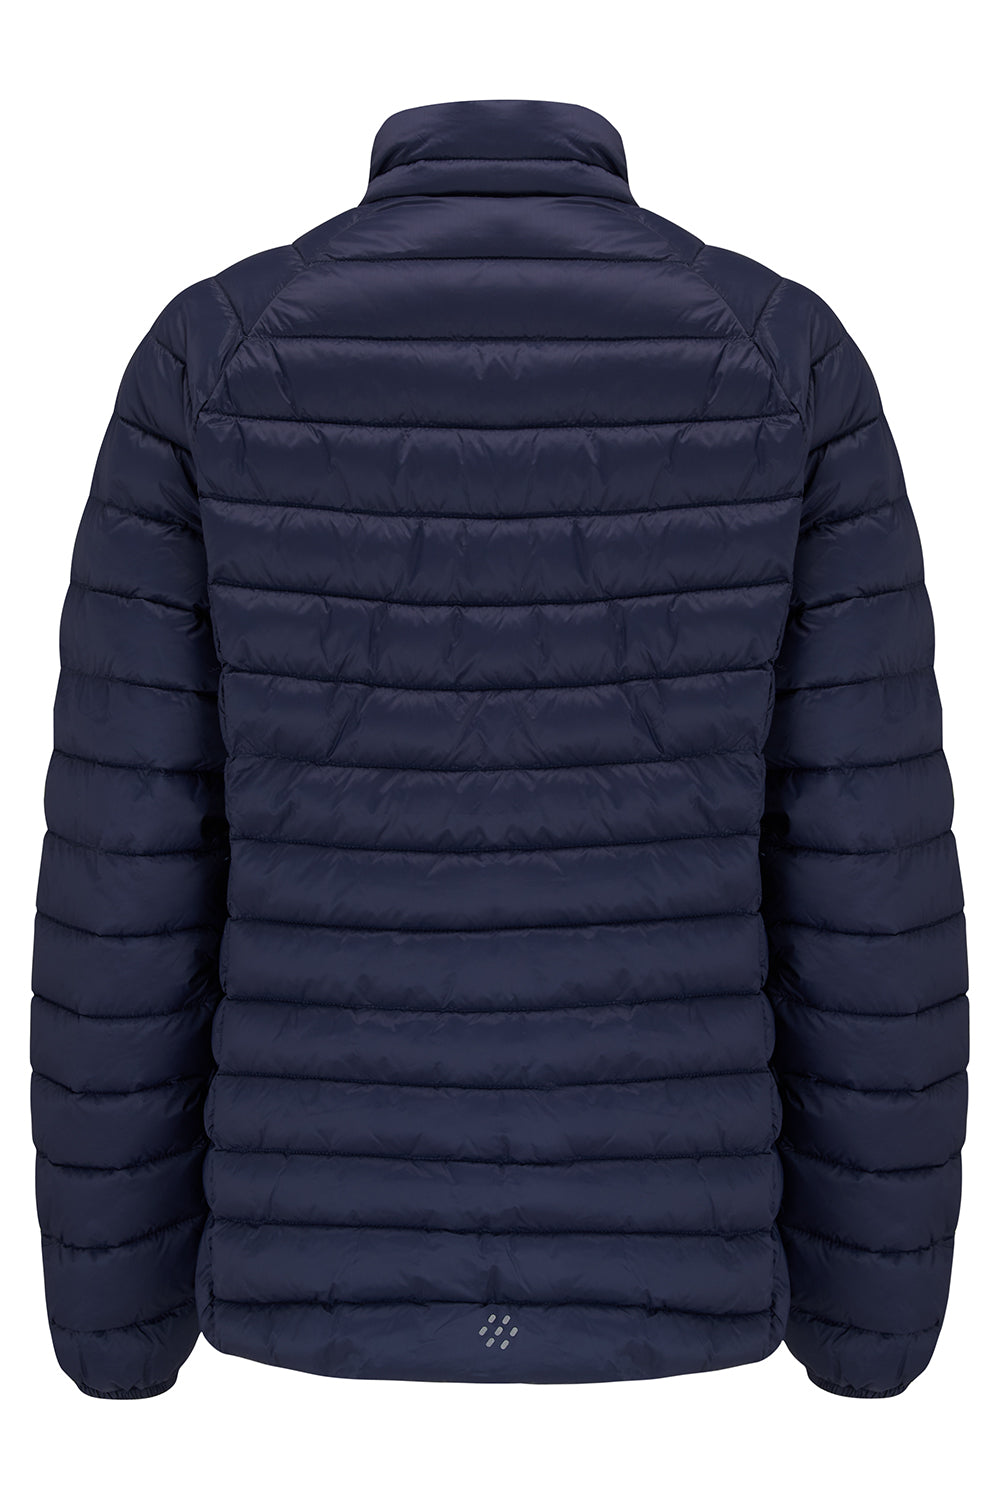 Synergy -  Women's Insulated Jacket - Navy